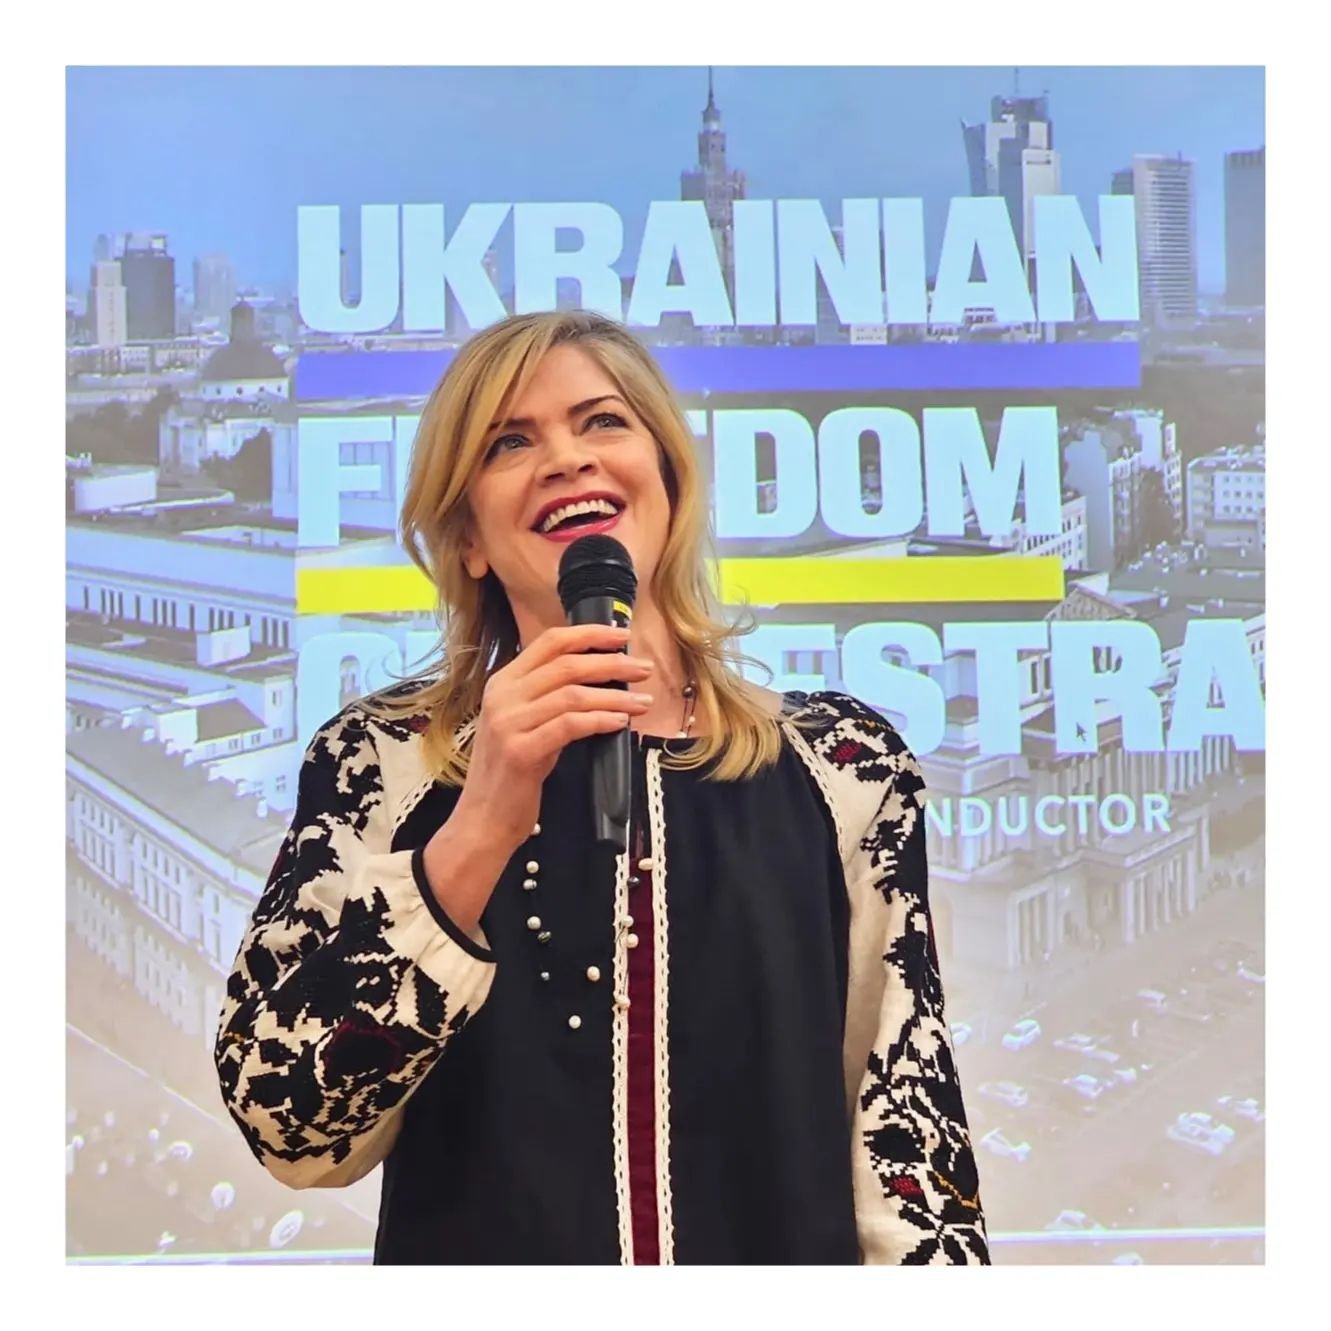 Support for Ukraine in Great Britain runs deep. In between performances at the @englishnationalopera last week, I was invited to speak at the Association of Ukrainians in Great Britain to an audience of Ukrainian and English artists and activists. In